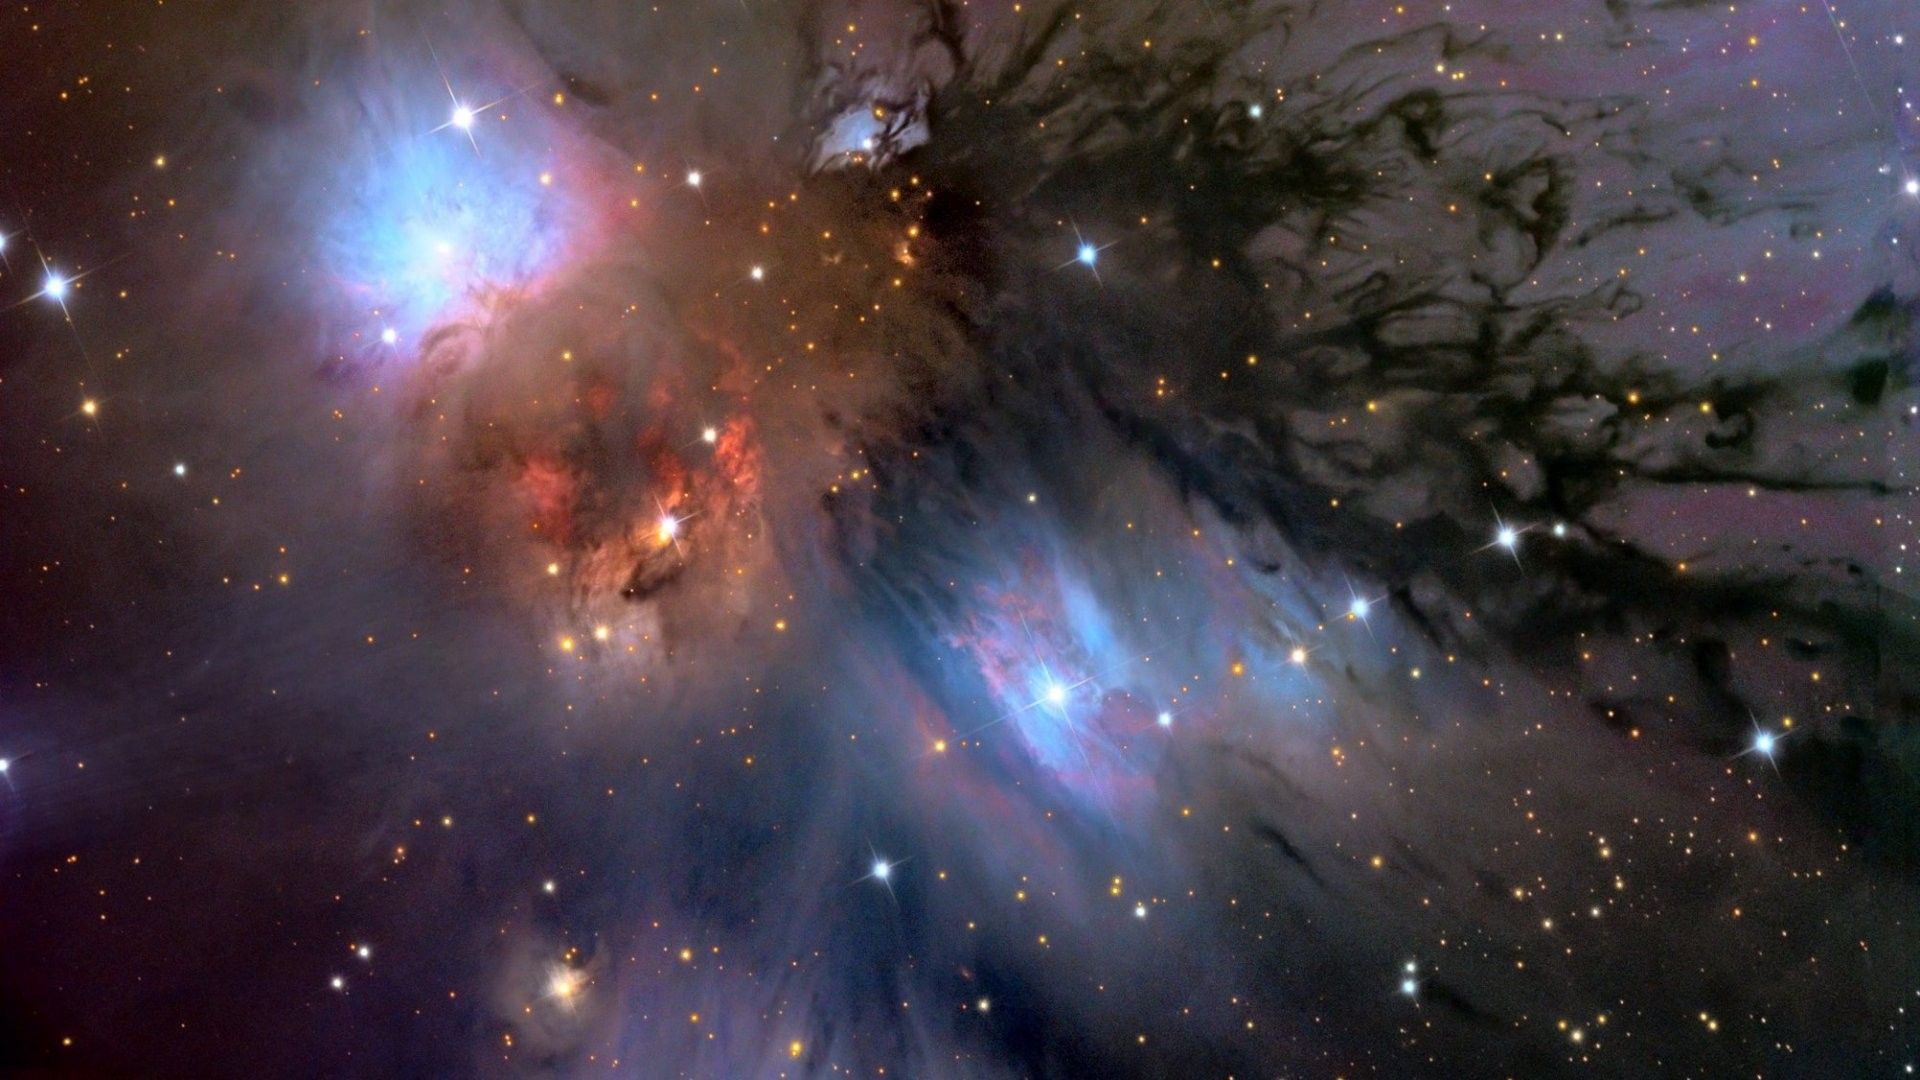 Space Wallpaper 1920x1080 Hubble - Pics about space